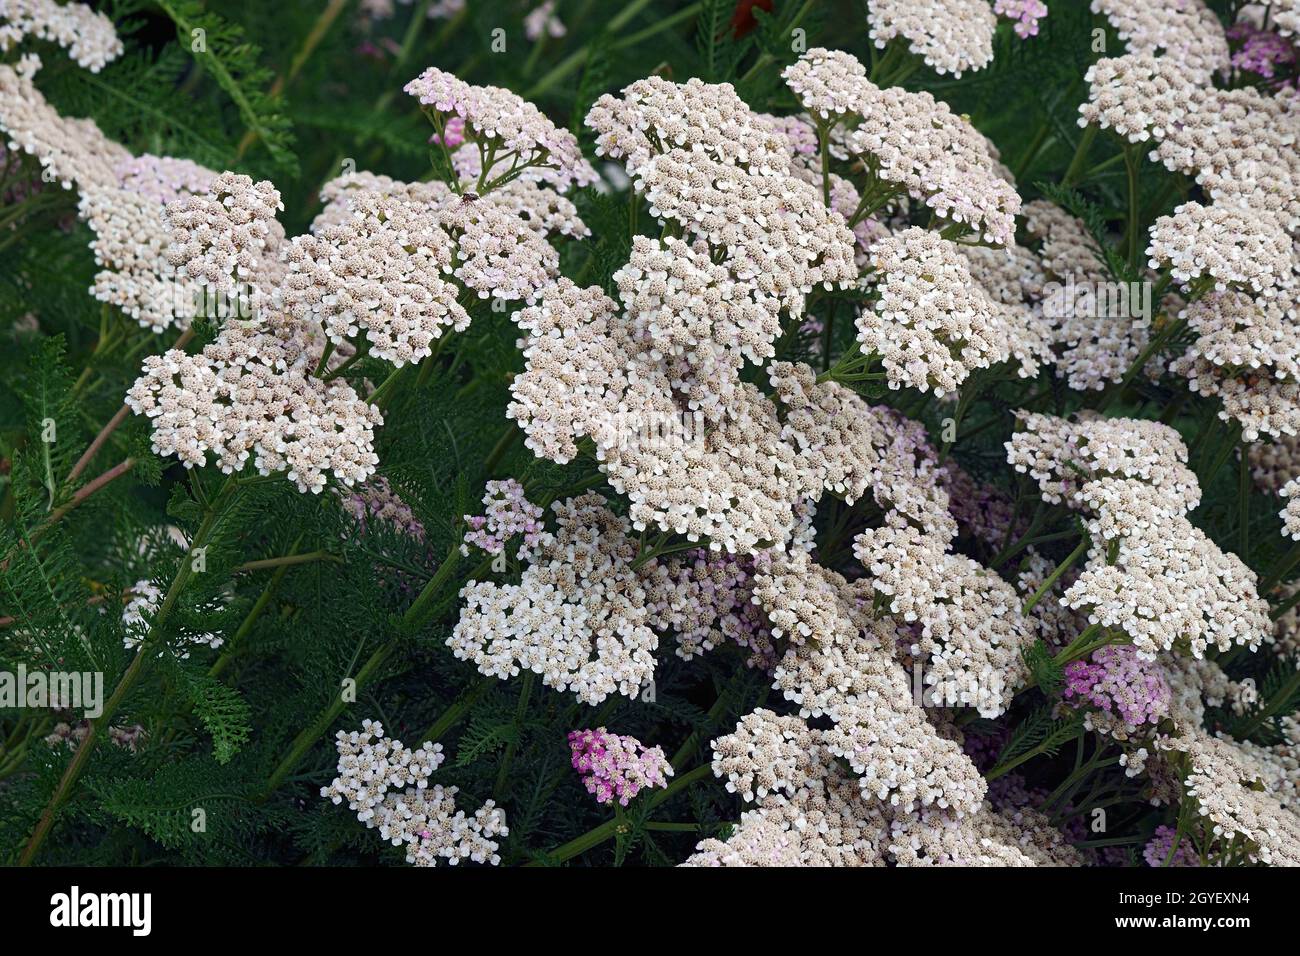 Yarrow (Achillea millefolium). Called Common yarrow, Nosebleed plant, Old man's pepper, Devil's nettle, Sanguinary and Milfoil also. Stock Photo